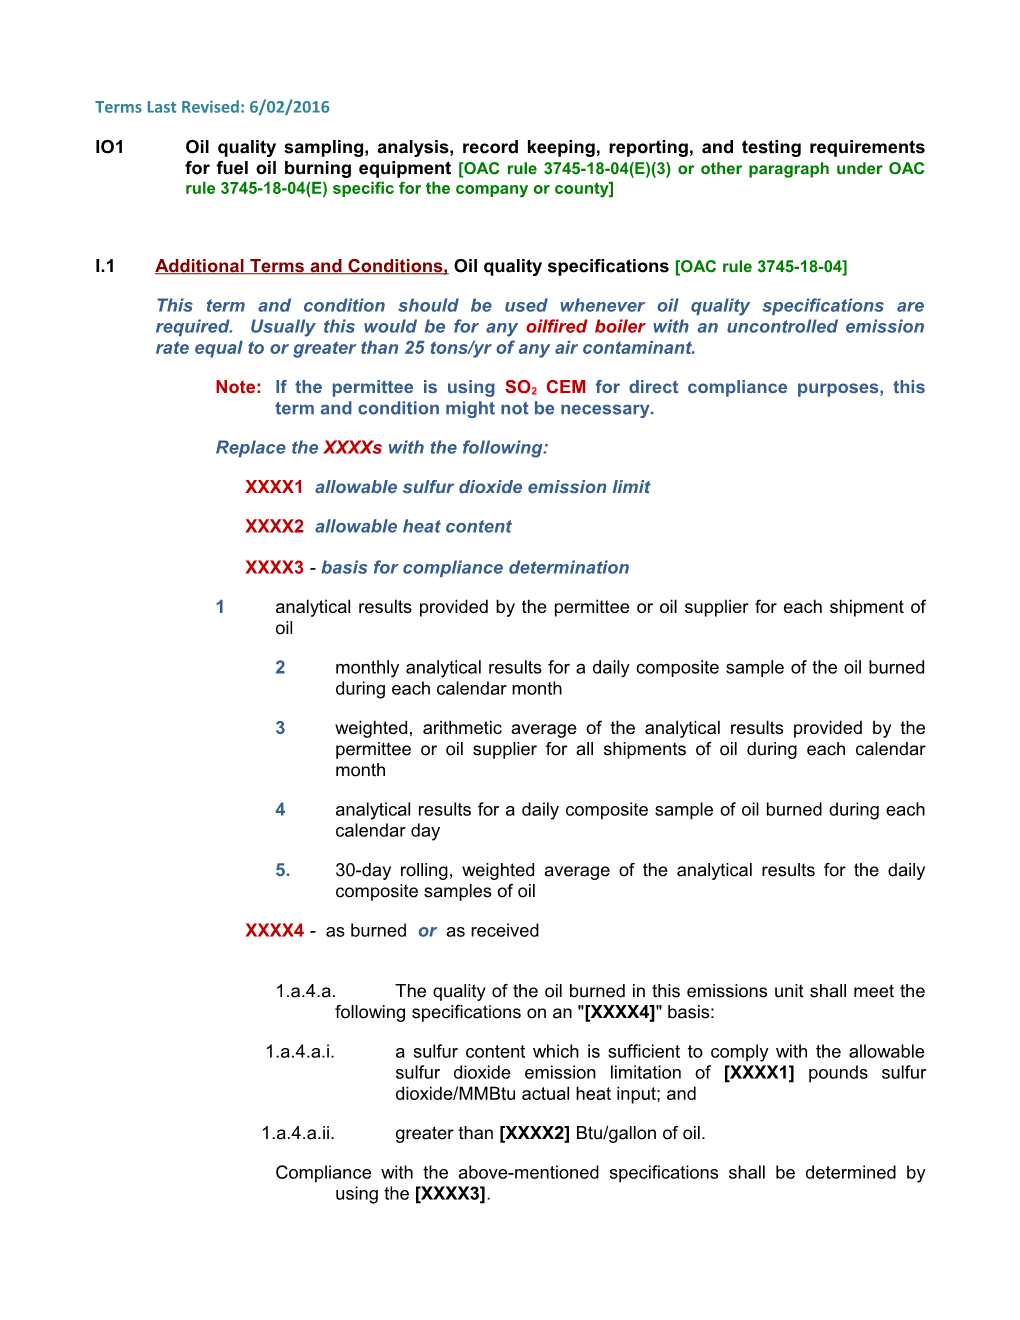 I.1Additional Terms and Conditions, Oil Quality Specifications OAC Rule 3745-18-04